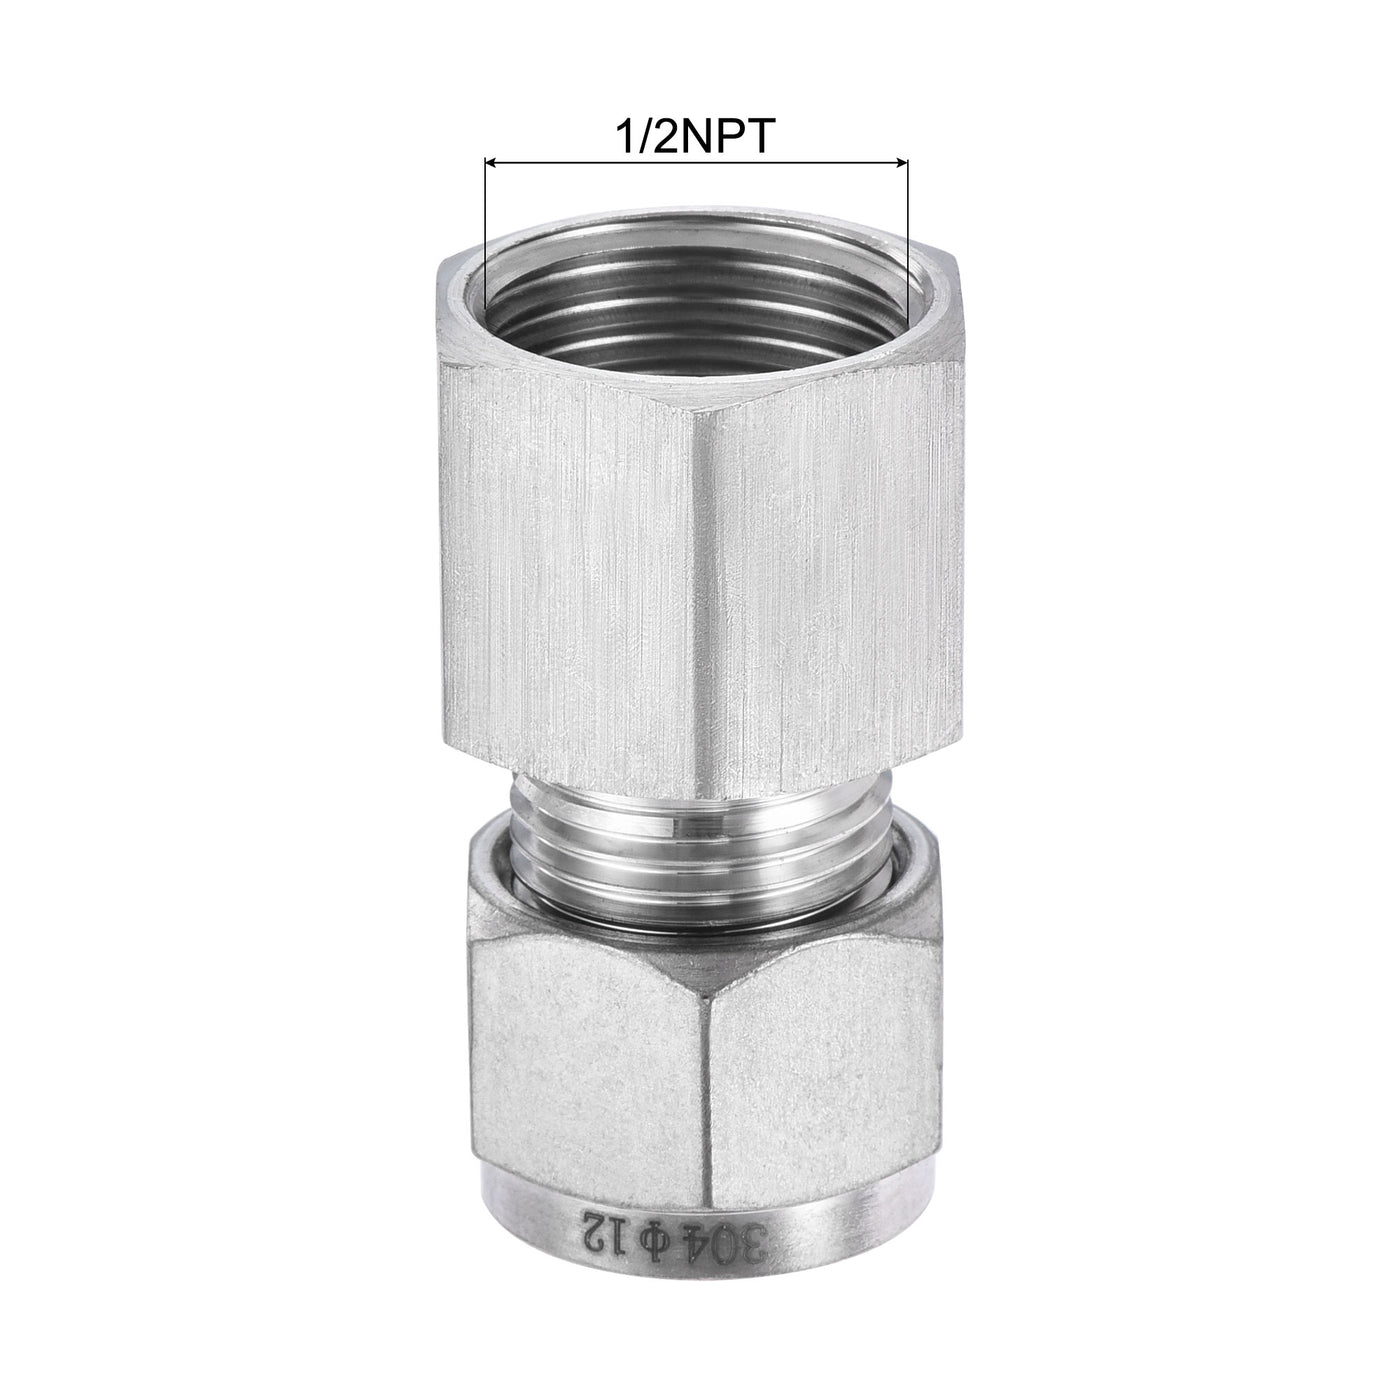 uxcell Uxcell Compression Tube Fitting 1/2NPT Female Thread x 12mm Tube OD Straight Coupling Adapter 304 Stainless Steel